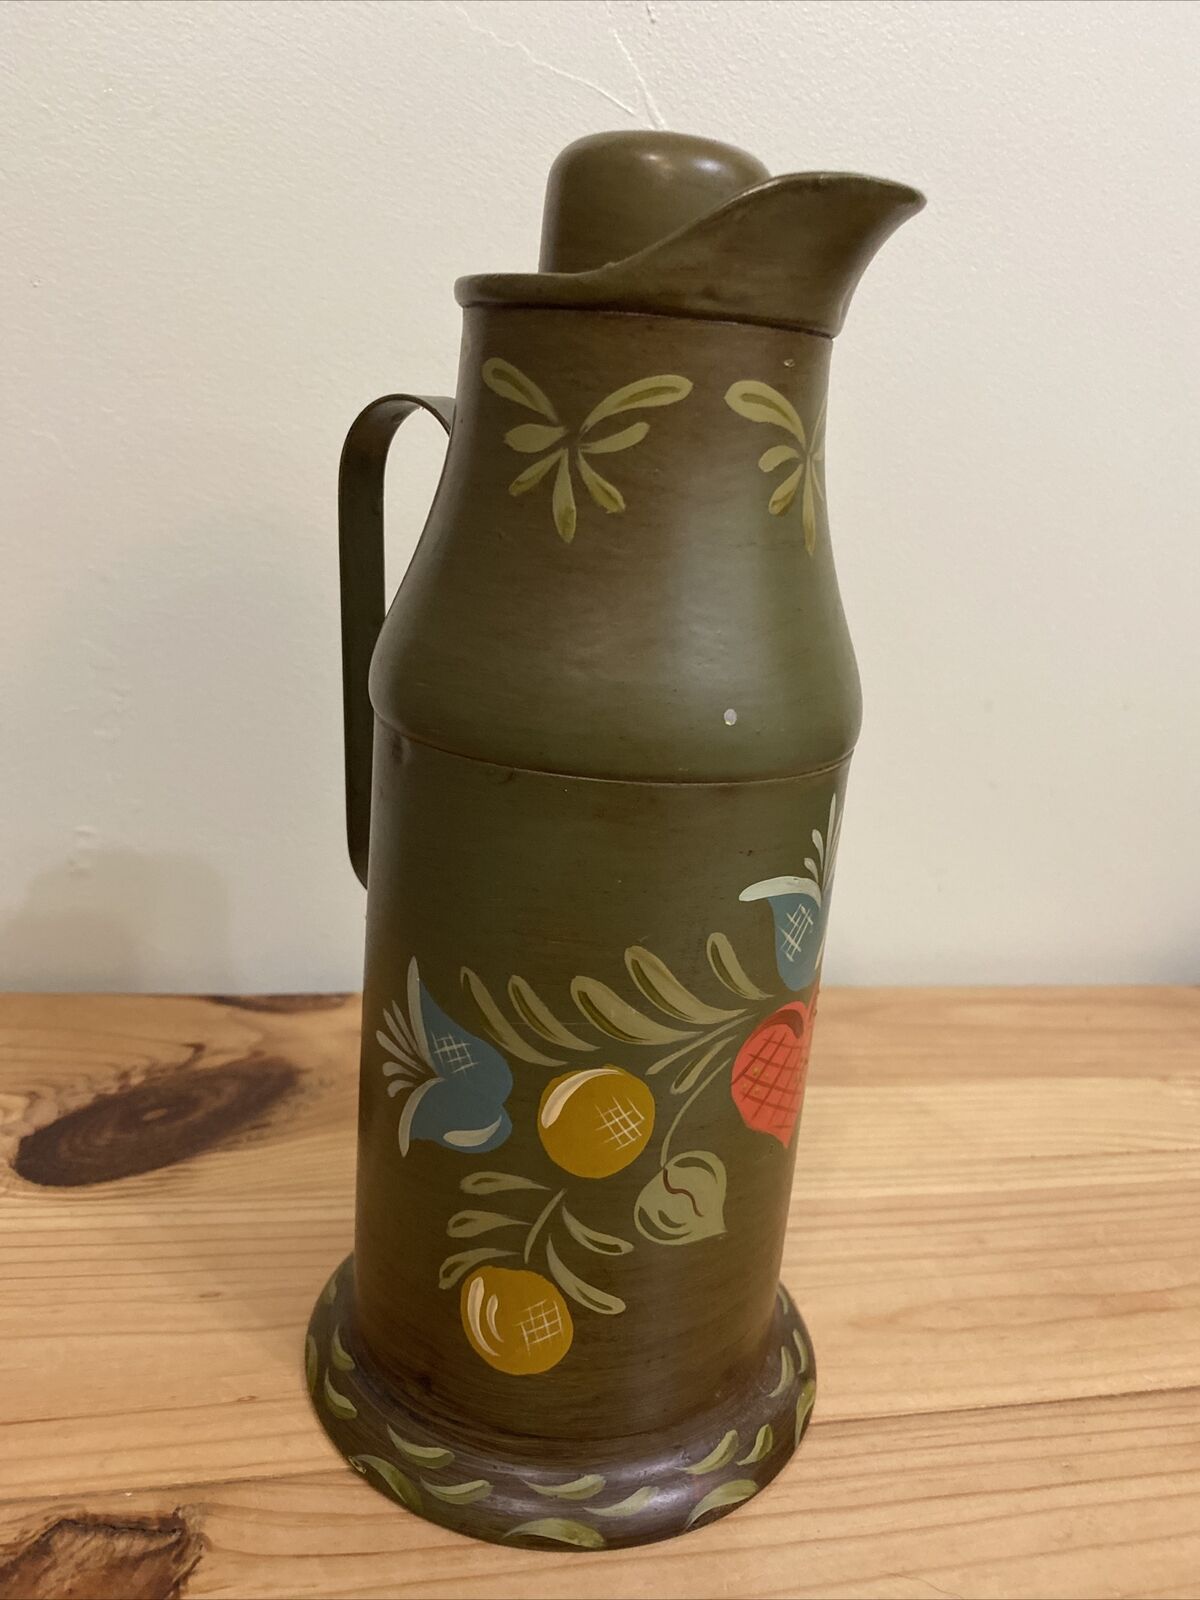 Vintage Antique Glass Lined Green Metal Coffee Carafe or Thermos With Cork